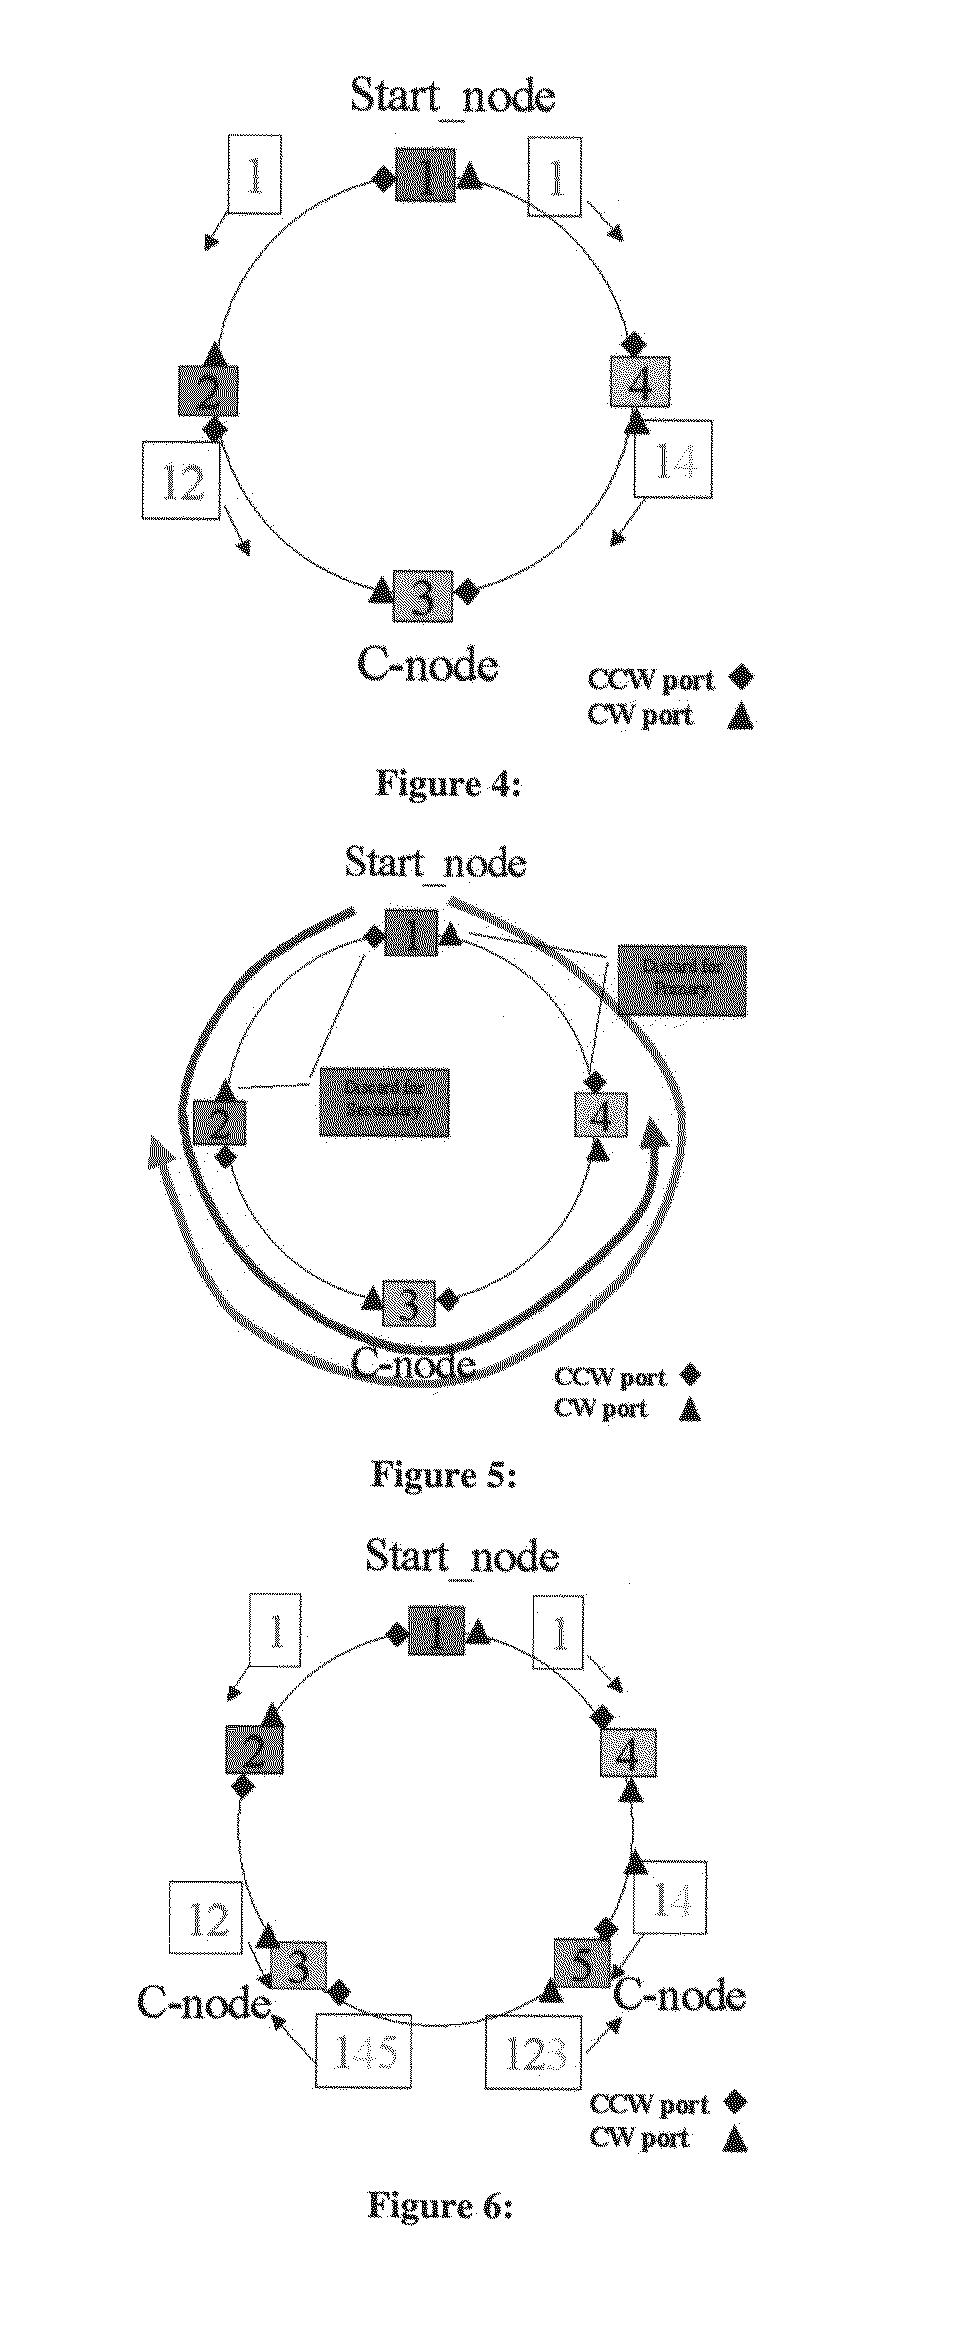 Method to Develop Hierarchical Ring Based Tree for Unicast and/or Multicast Traffic